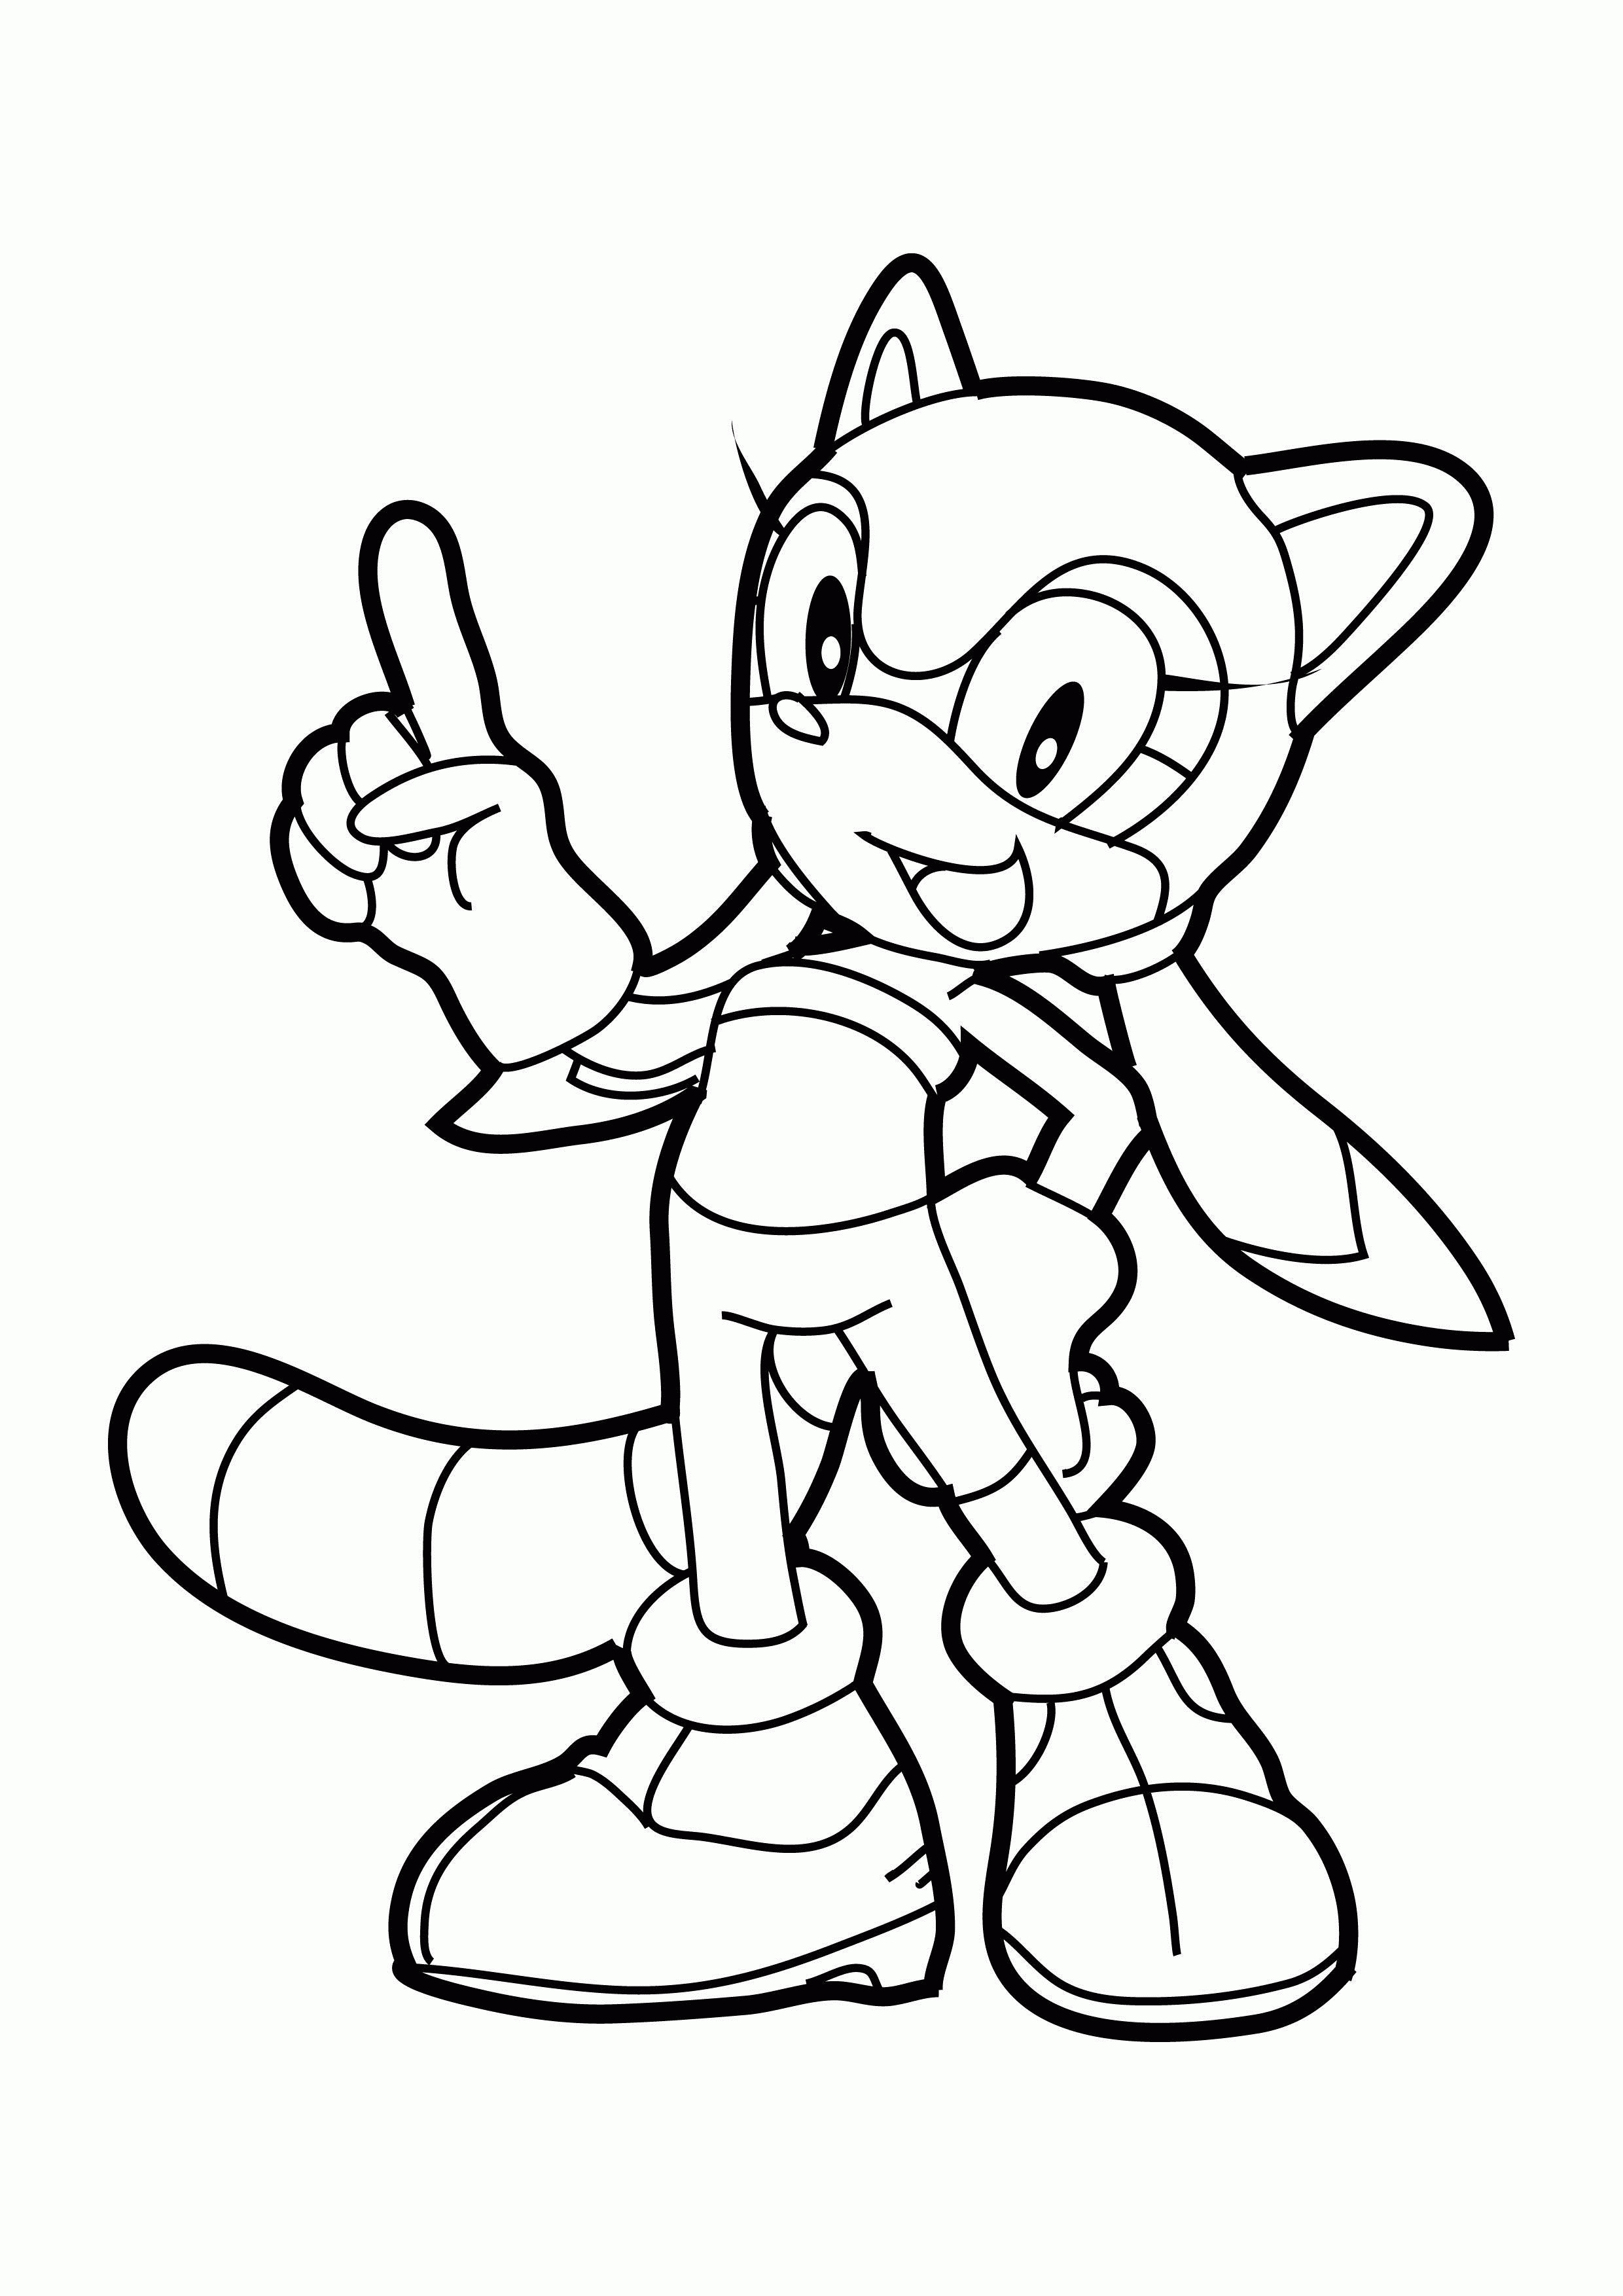 Sonic the Hedgehog Coloring Pages and Book | UniqueColoringPages